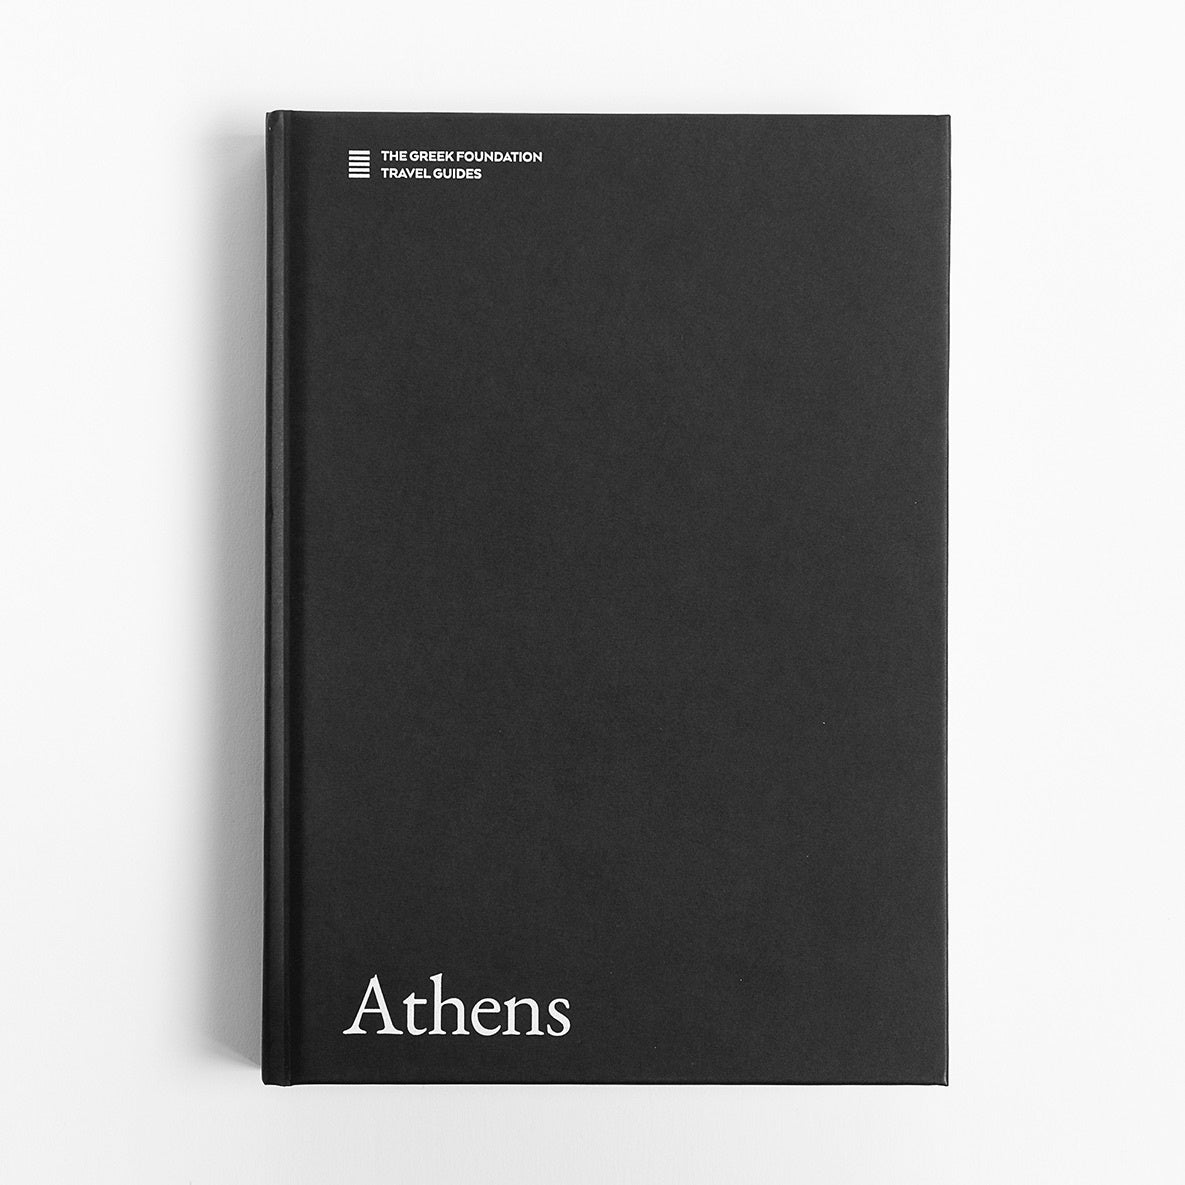 ATHENS: THE GREEK FOUNDATION TRAVEL GUIDES